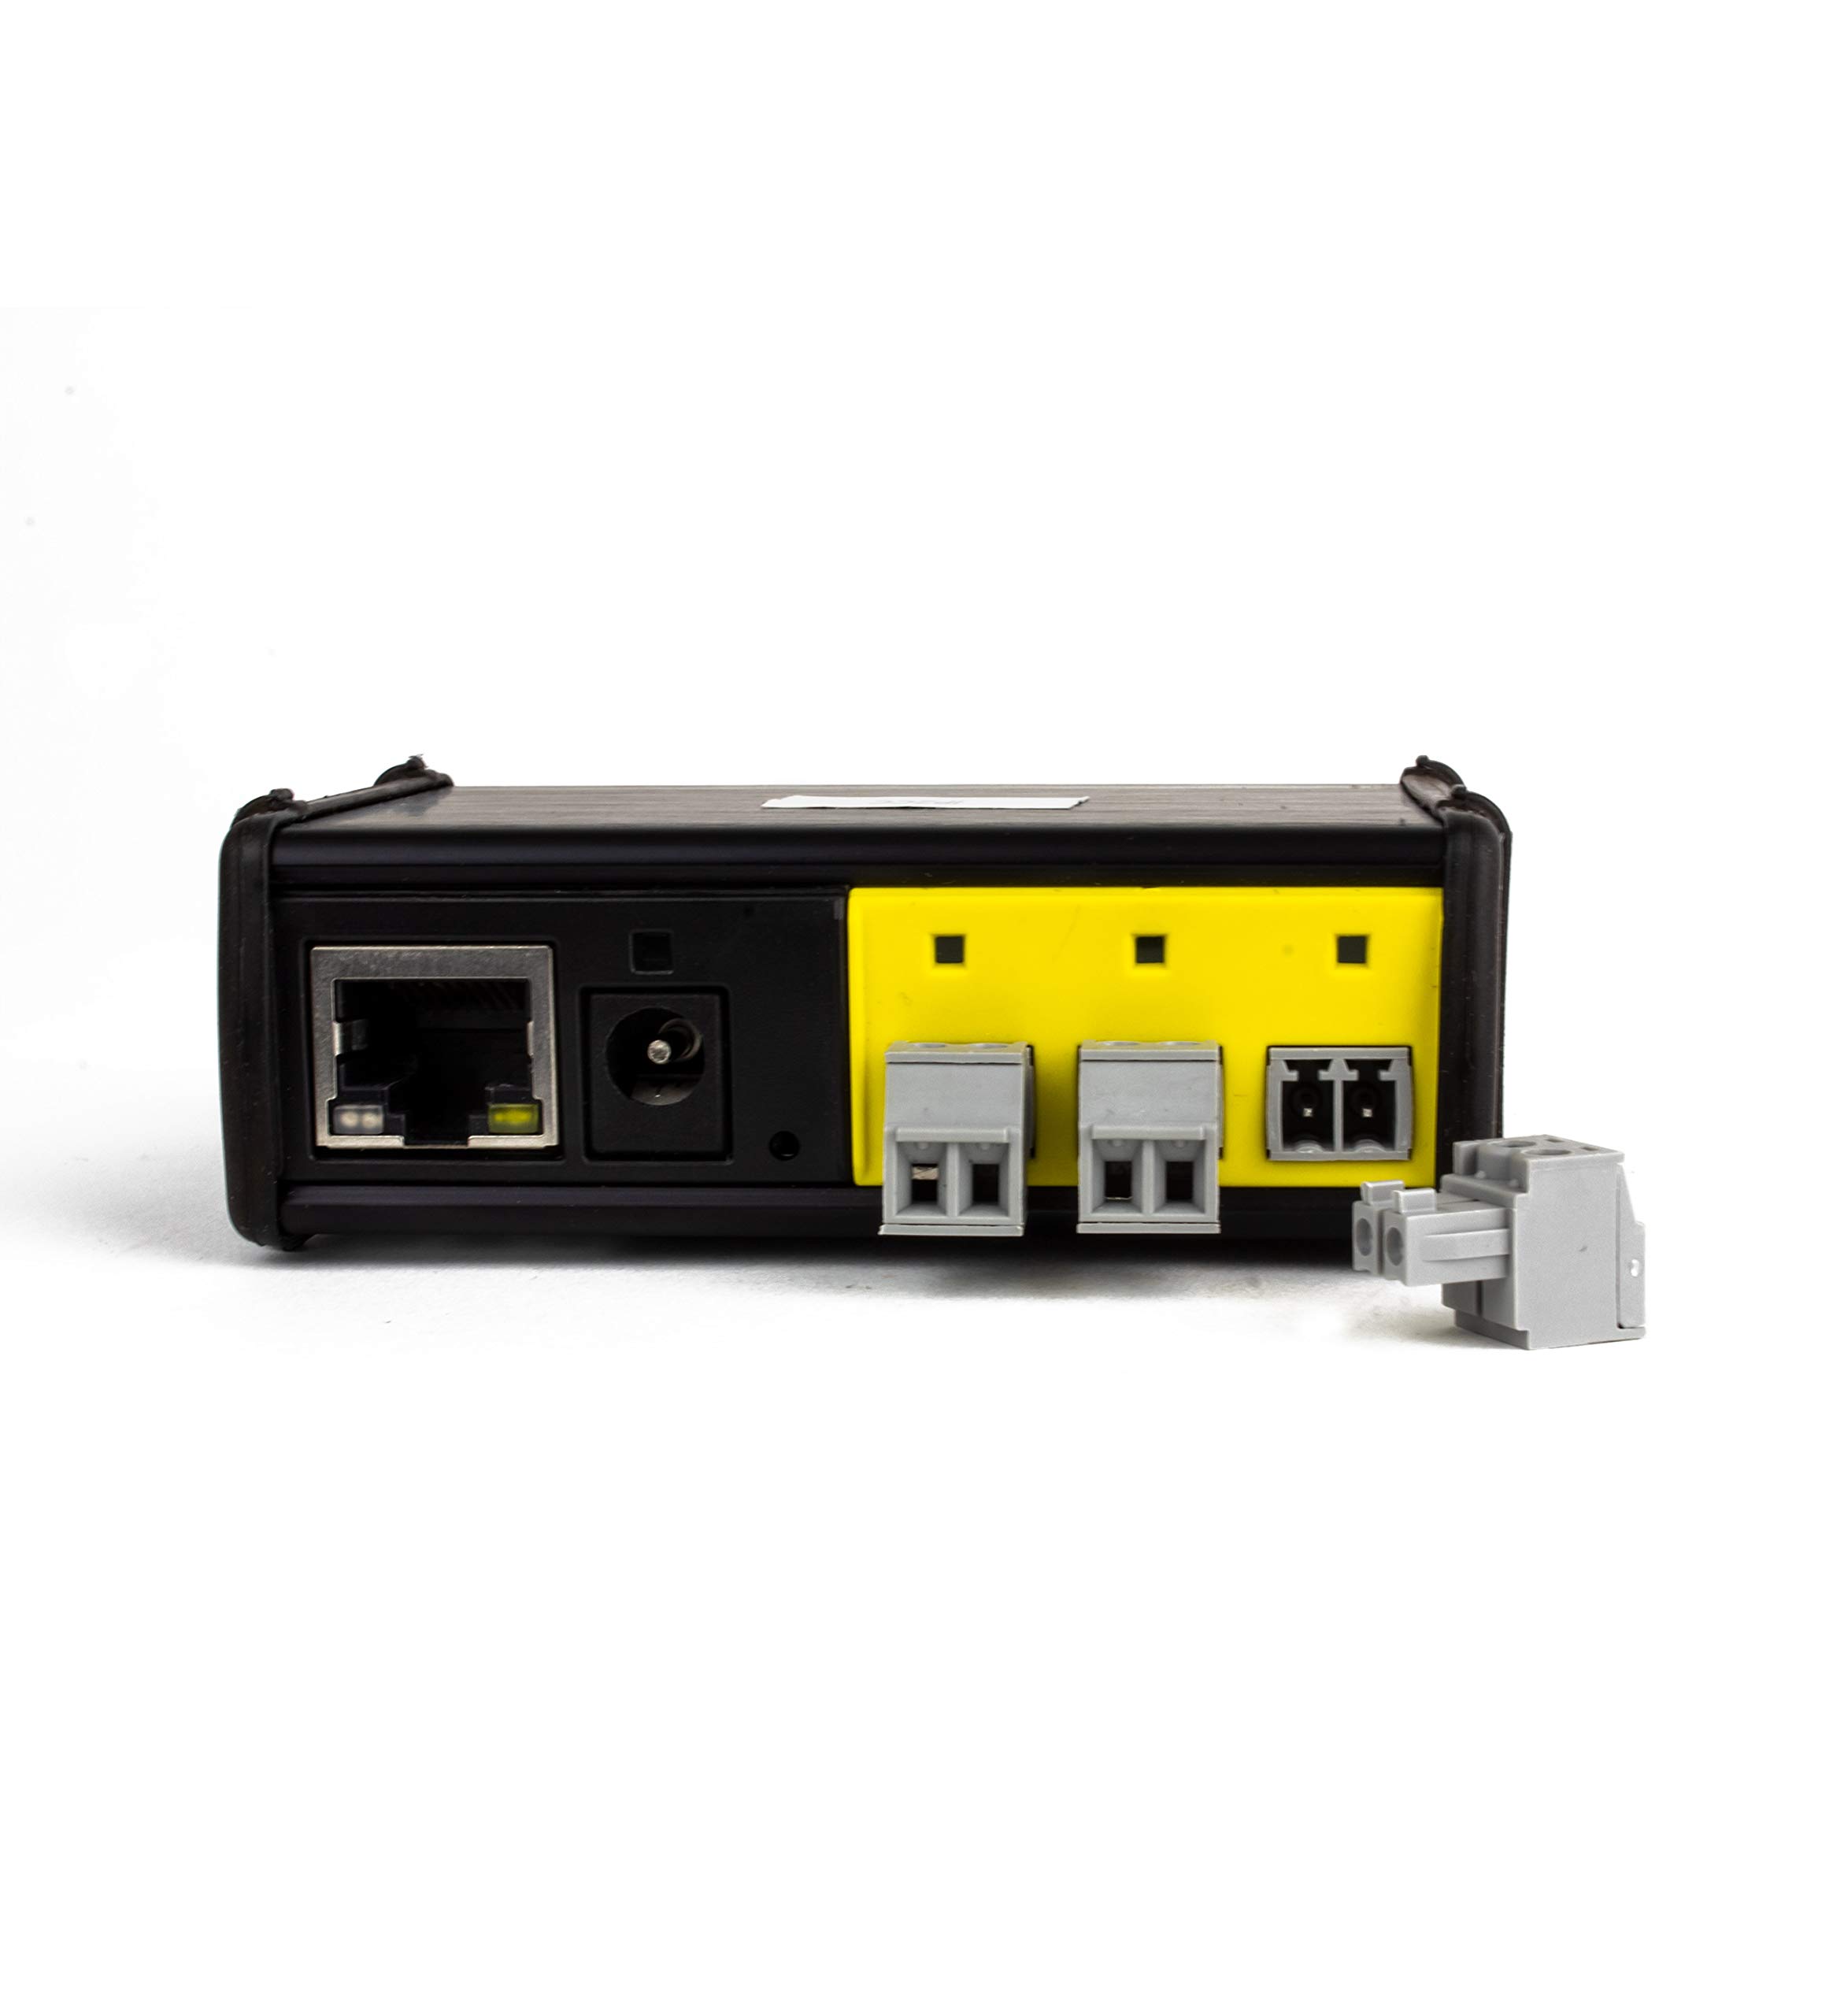 Global Caché IP2CC iTach TCP/IP to Contact Closure Converter - Connects Relay Devices to a Wired Connection